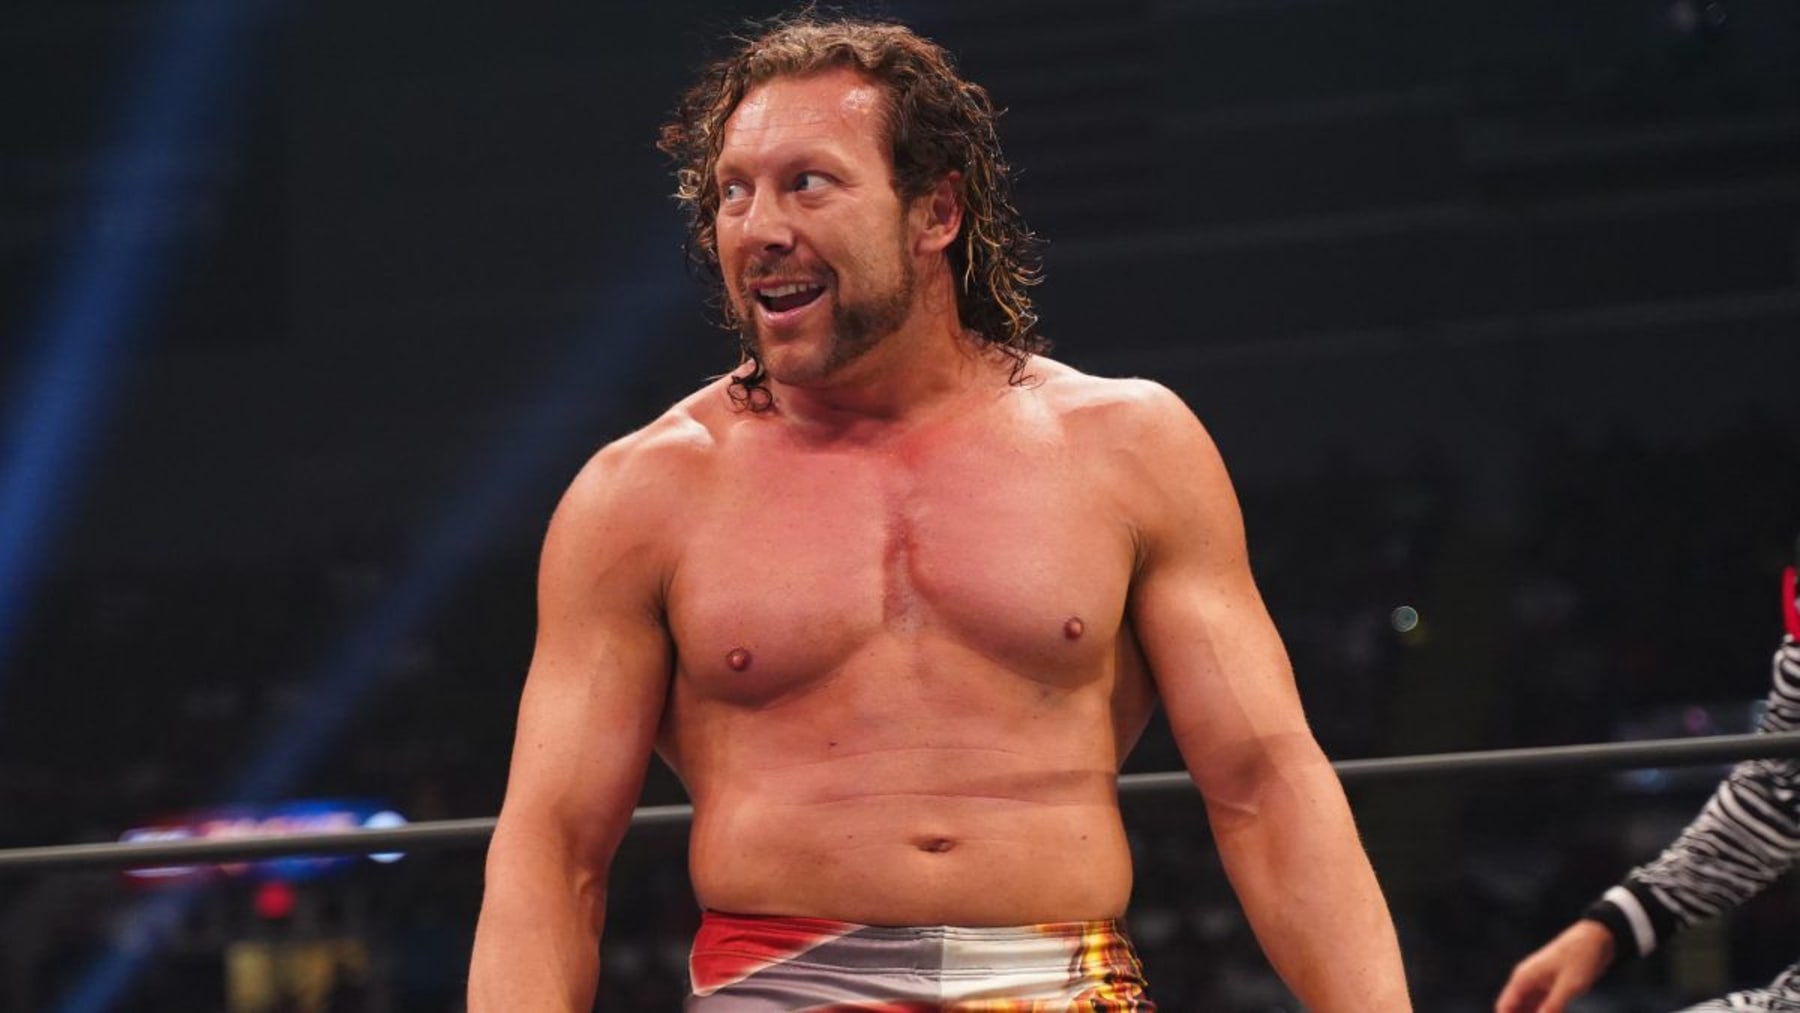 Kenny Omega Returns to AEW in Stunning Manner - Sports Illustrated